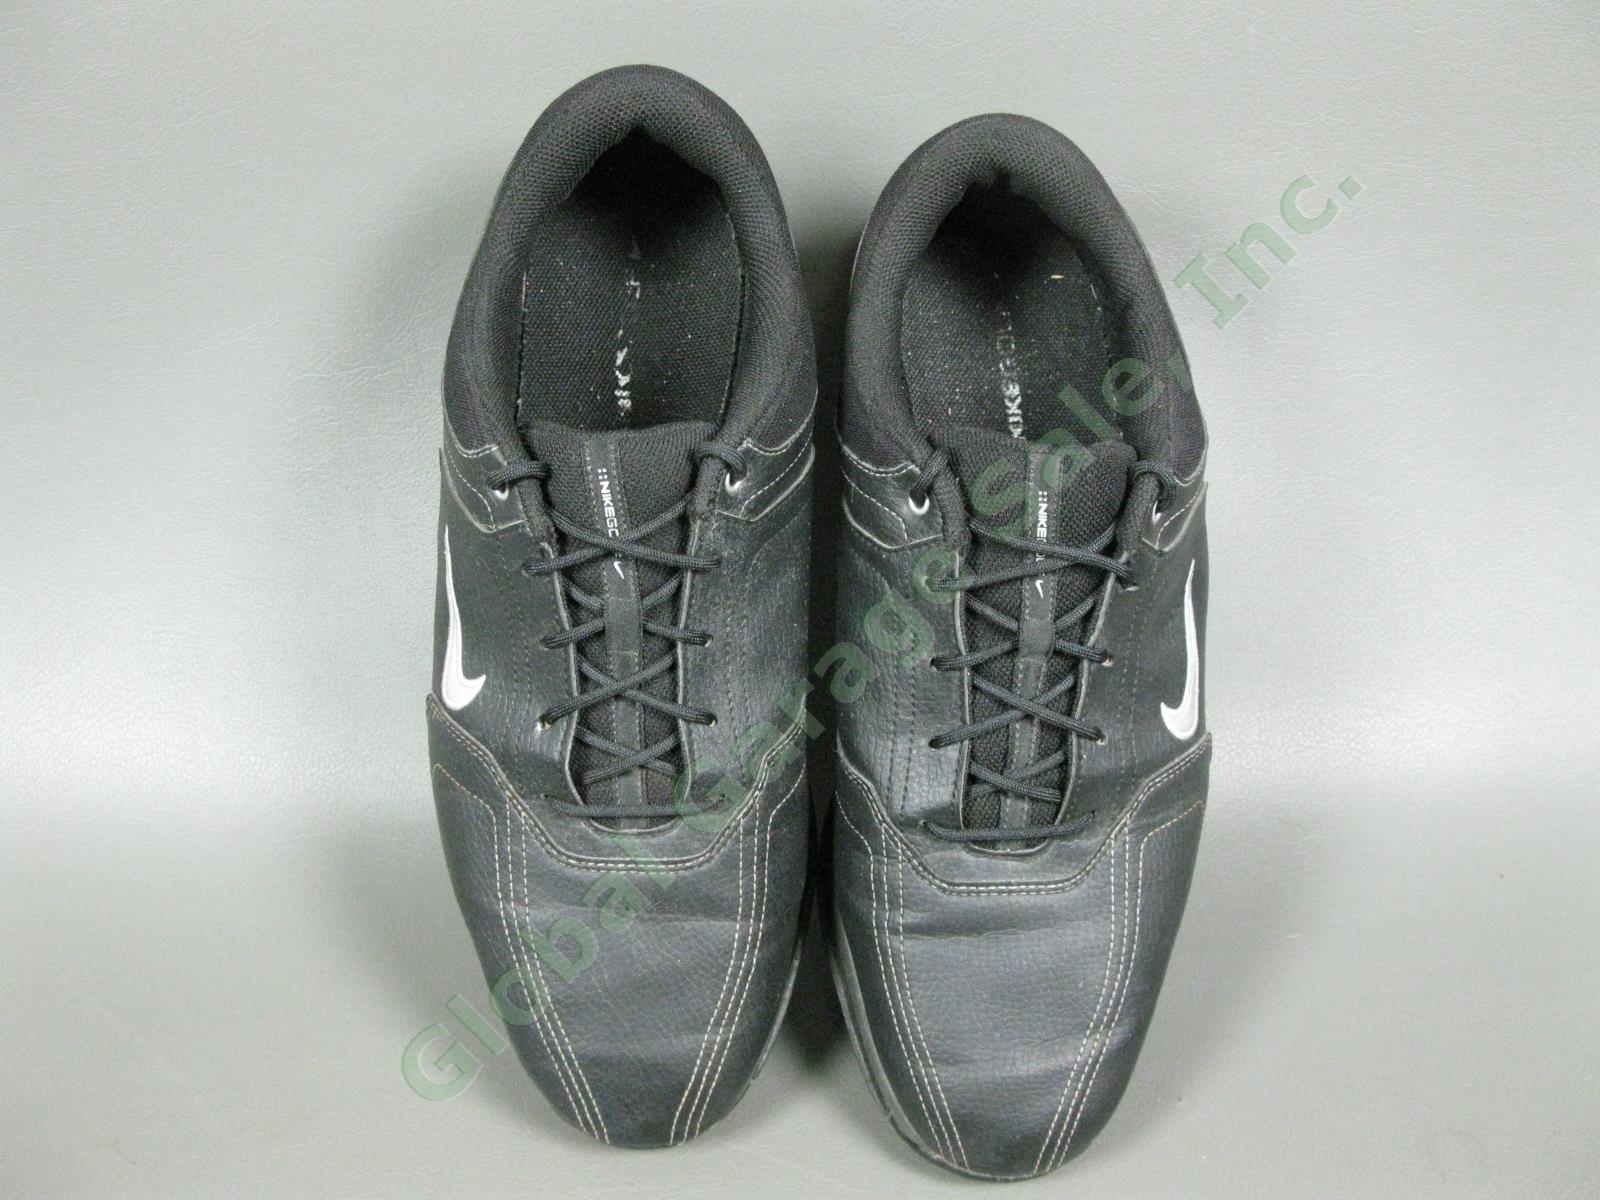 Nike Heritage Mens Leather Golf Shoe Pair Size 10 Black White Athletic Shoes 2